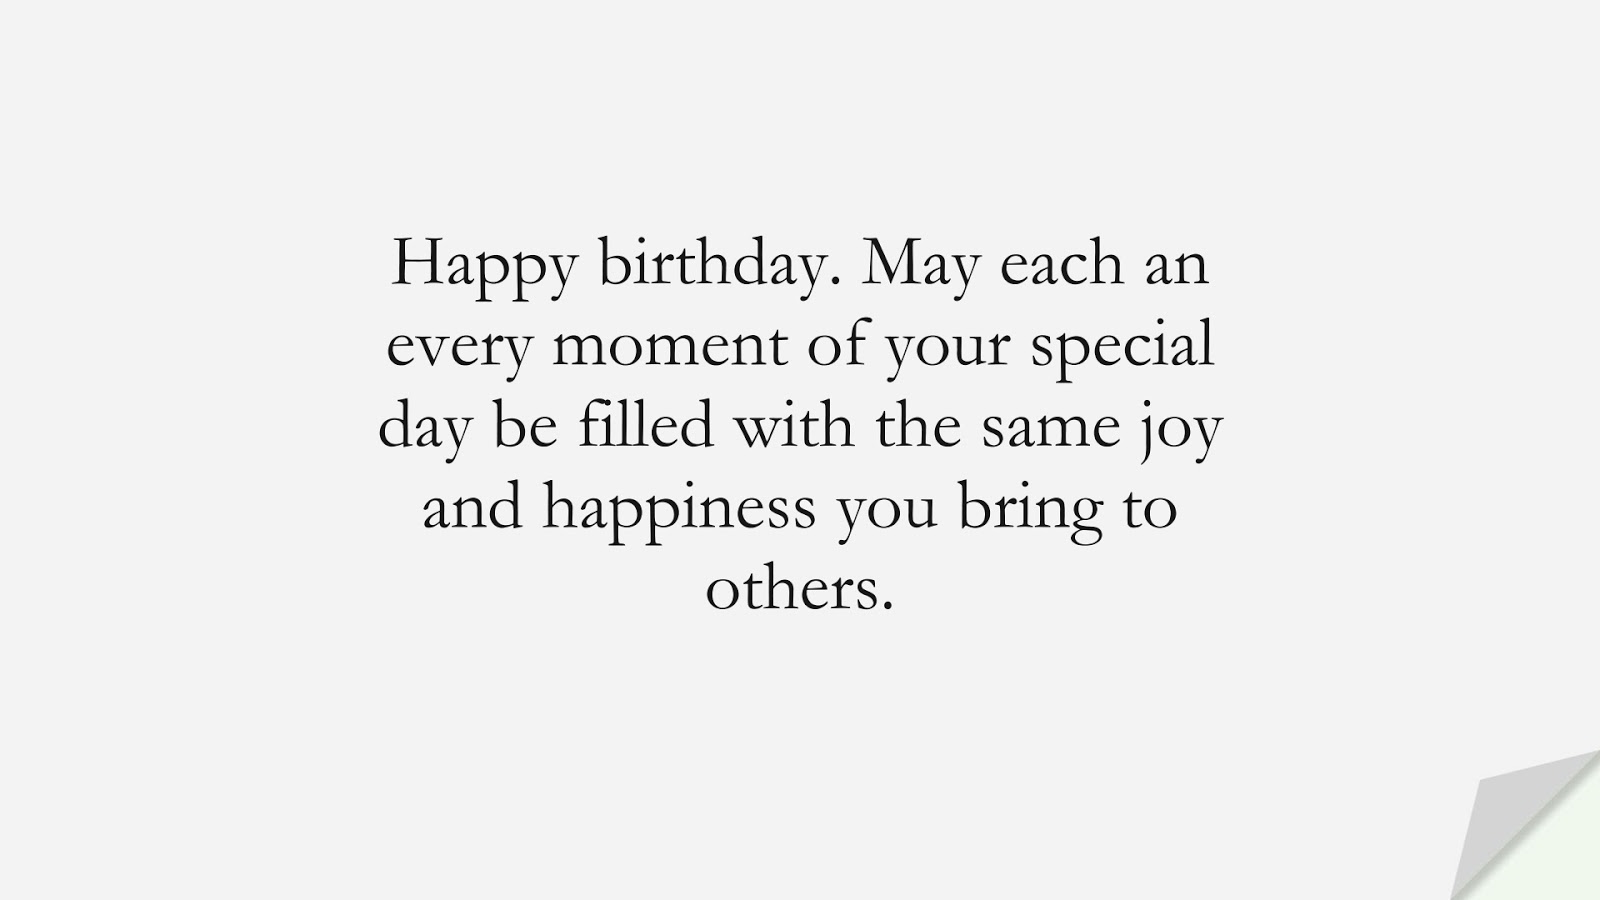 Happy birthday. May each an every moment of your special day be filled with the same joy and happiness you bring to others.FALSE